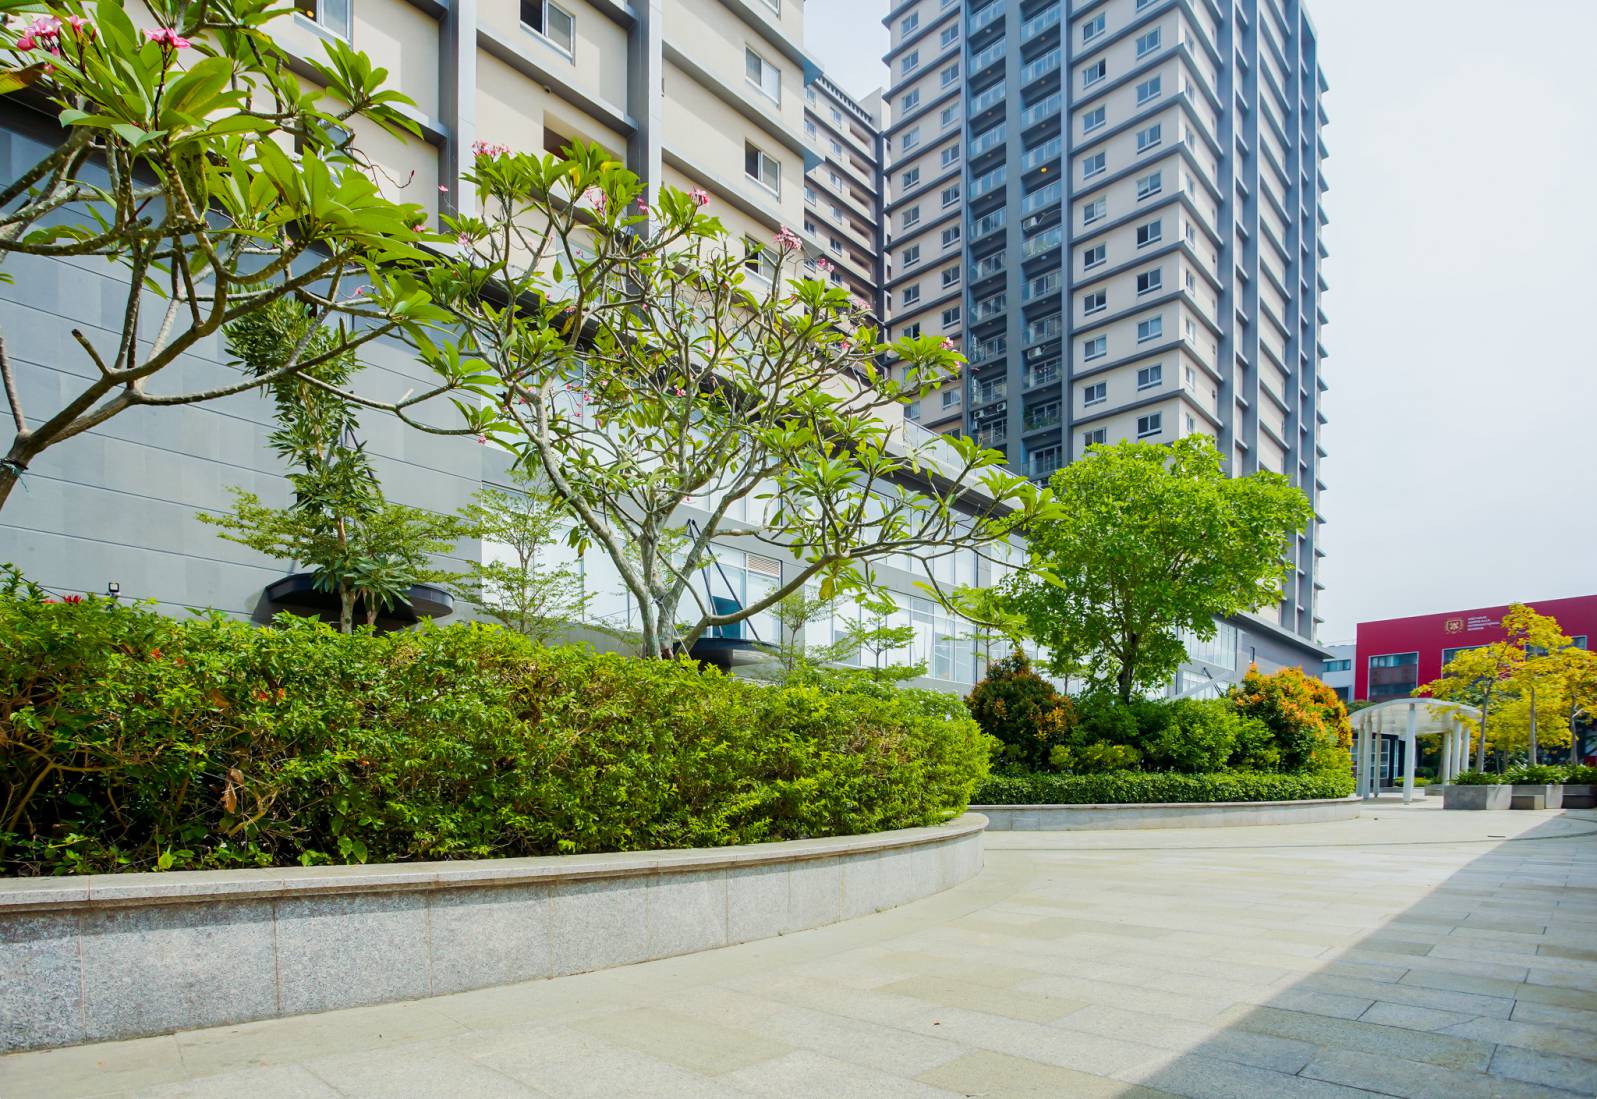 KEY ELEMENTS ATTRACTING APARTMENT BUYERS - COSMO CITY